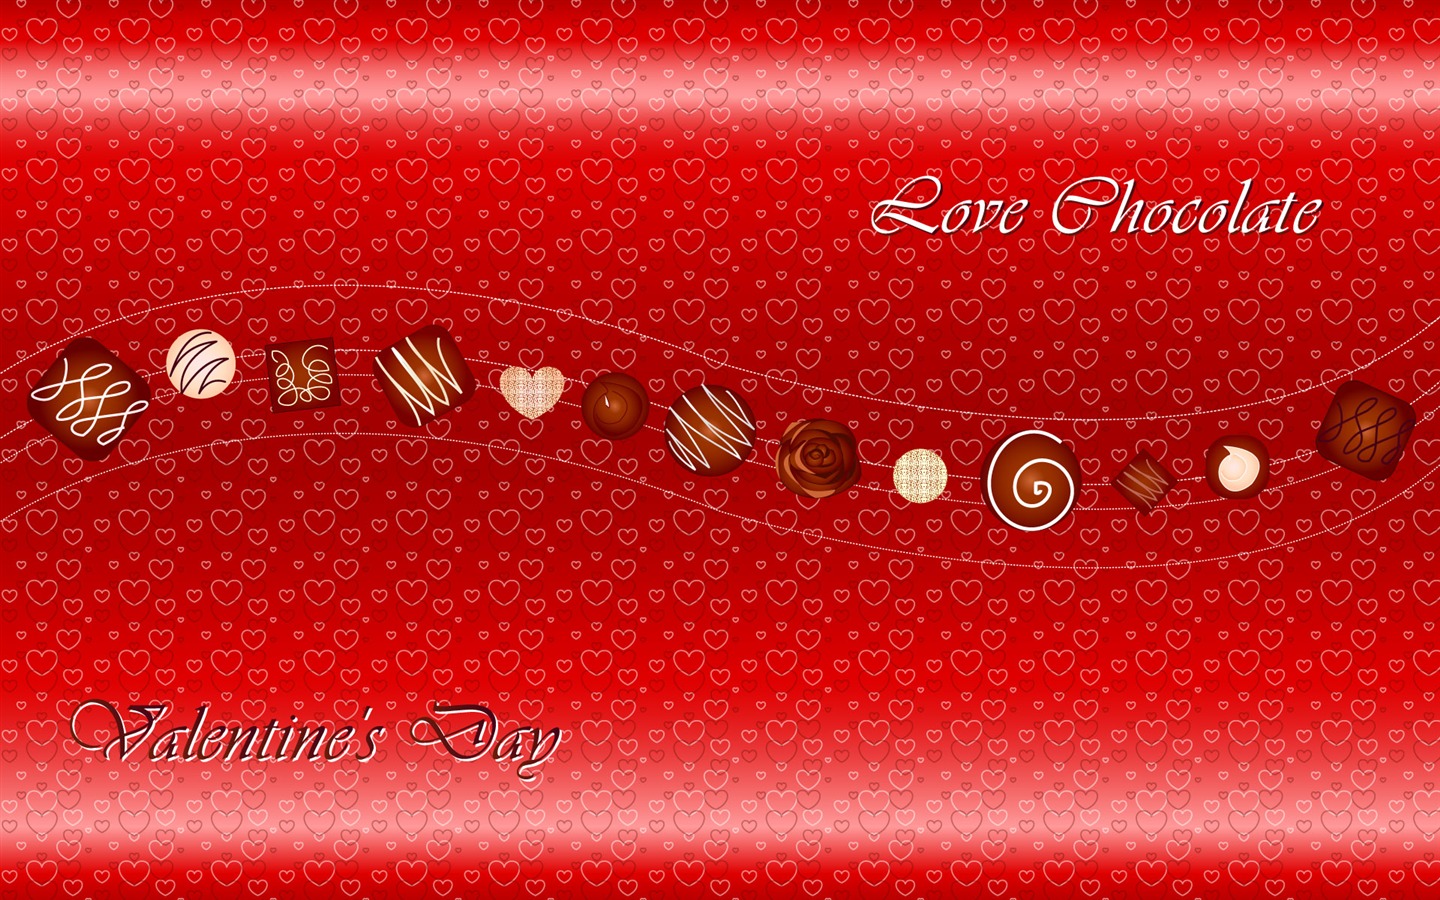 Valentine's Day Theme Wallpapers (1) #2 - 1440x900